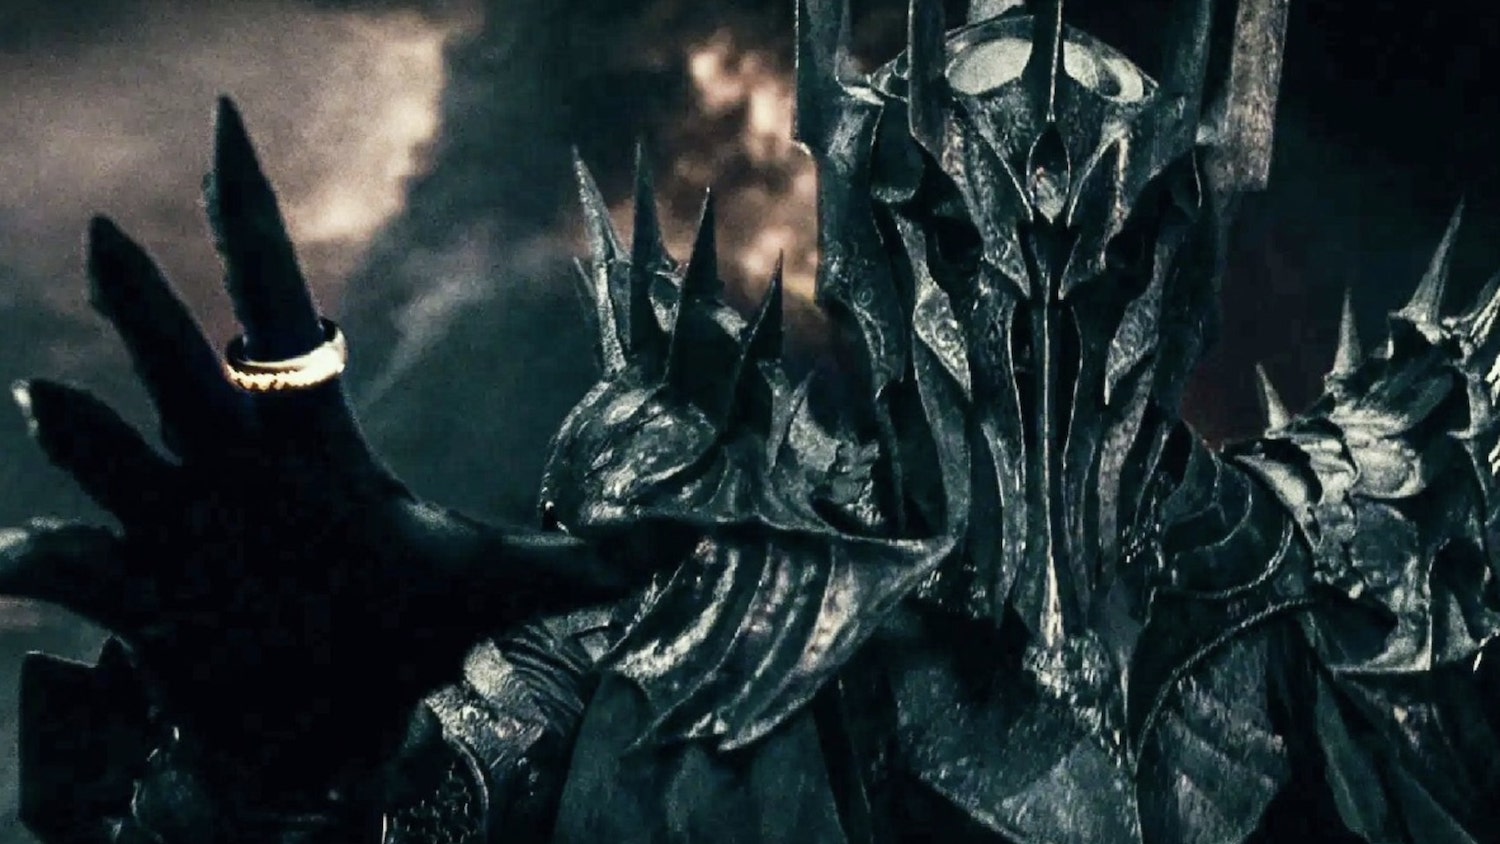 Sauron with the One Ring in Peter Jackson's the Lord of the Rings: Fellowship of the Ring